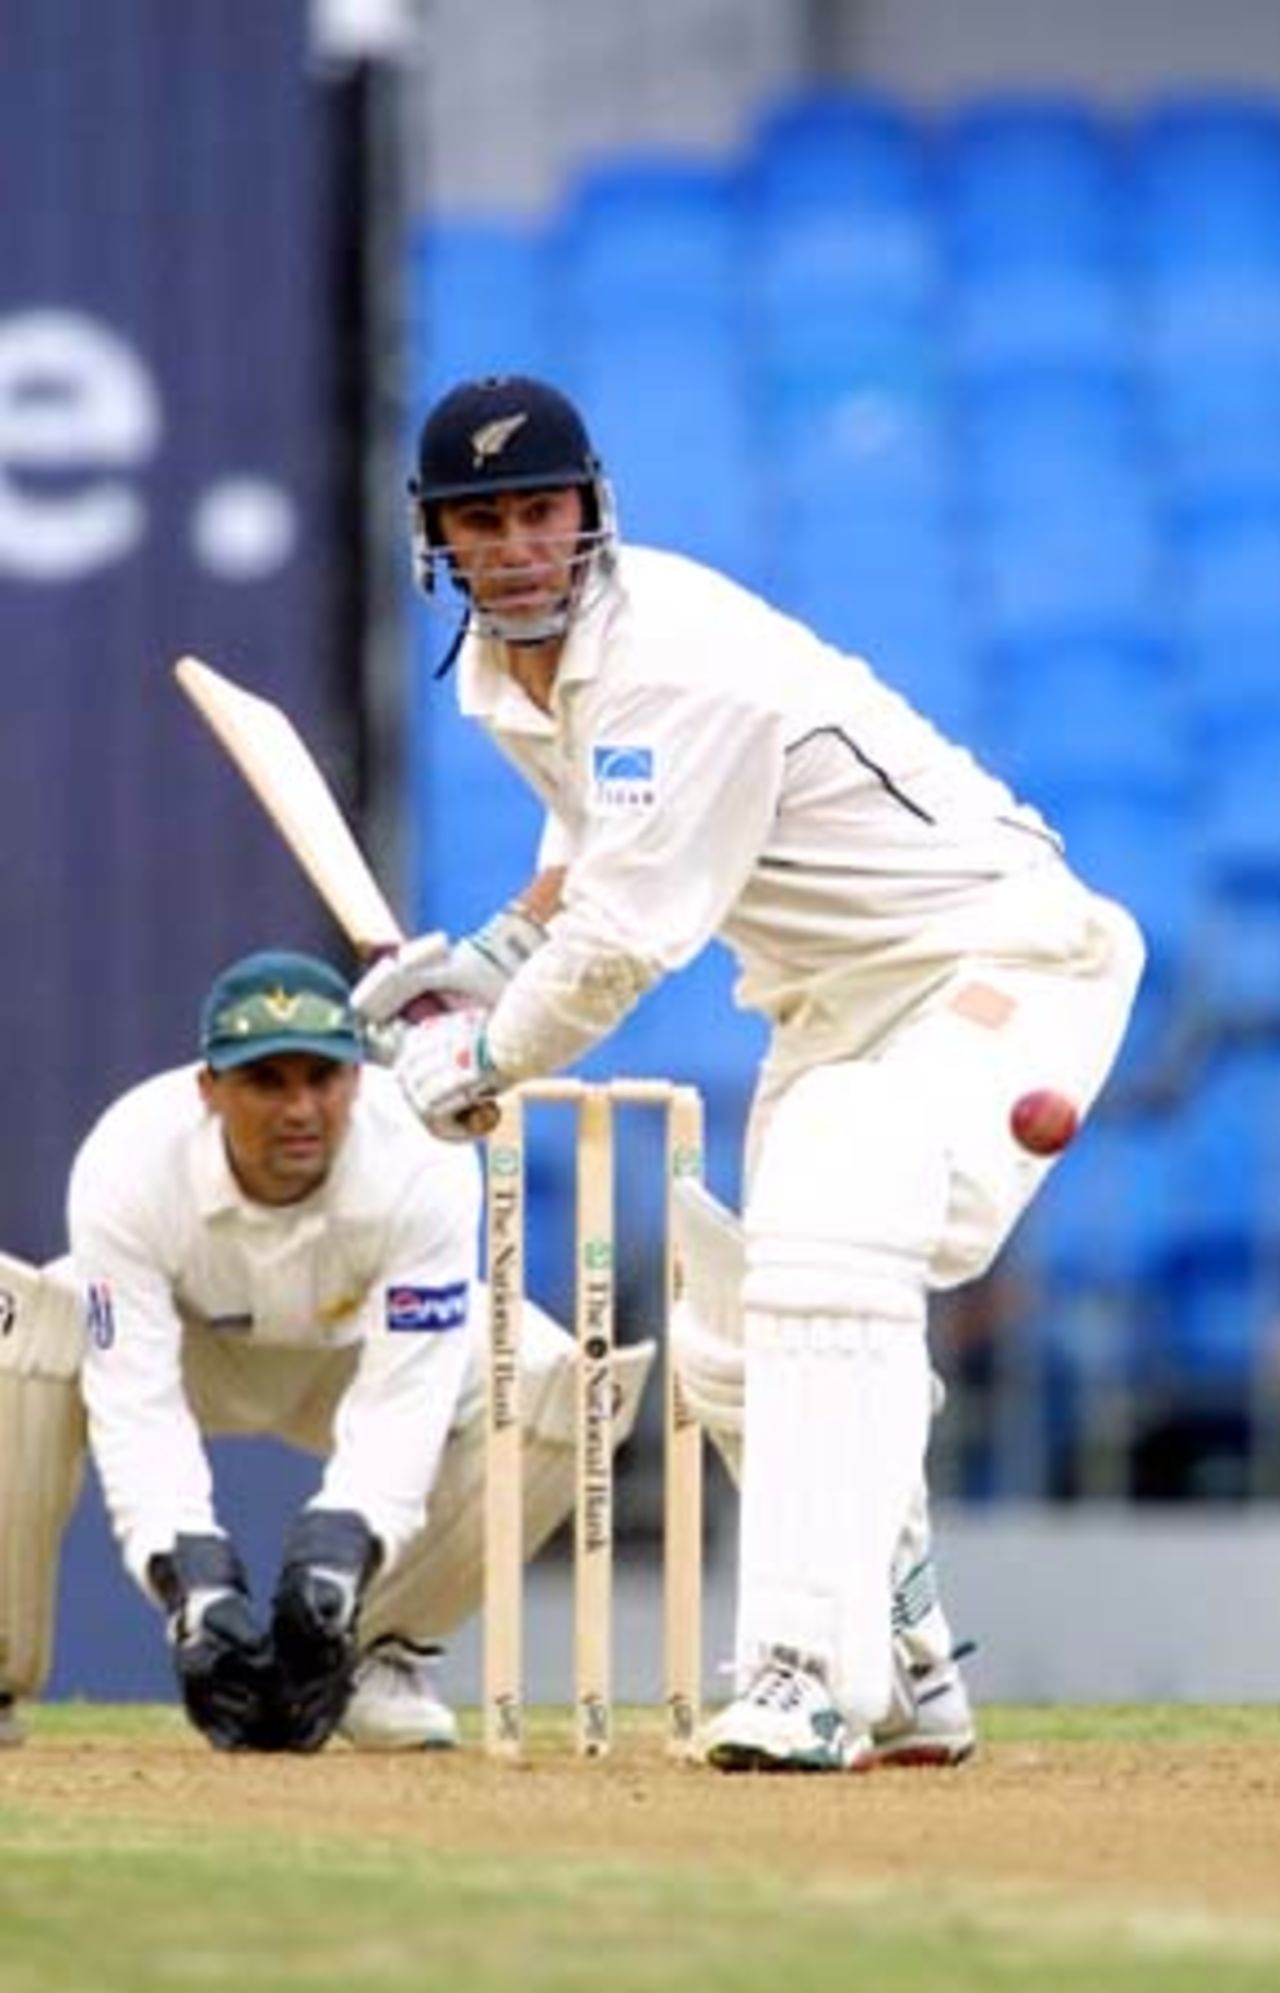 New Zealand batsman Mathew Sinclair shapes to play a delivery from Pakistan off spinner Saqlain Mushtaq while wicket-keeper Moin Khan looks on. Sinclair ended the second day's play on 28 not out. 1st Test: New Zealand v Pakistan at Eden Park, Auckland, 8-12 March 2001 (9 March 2001).